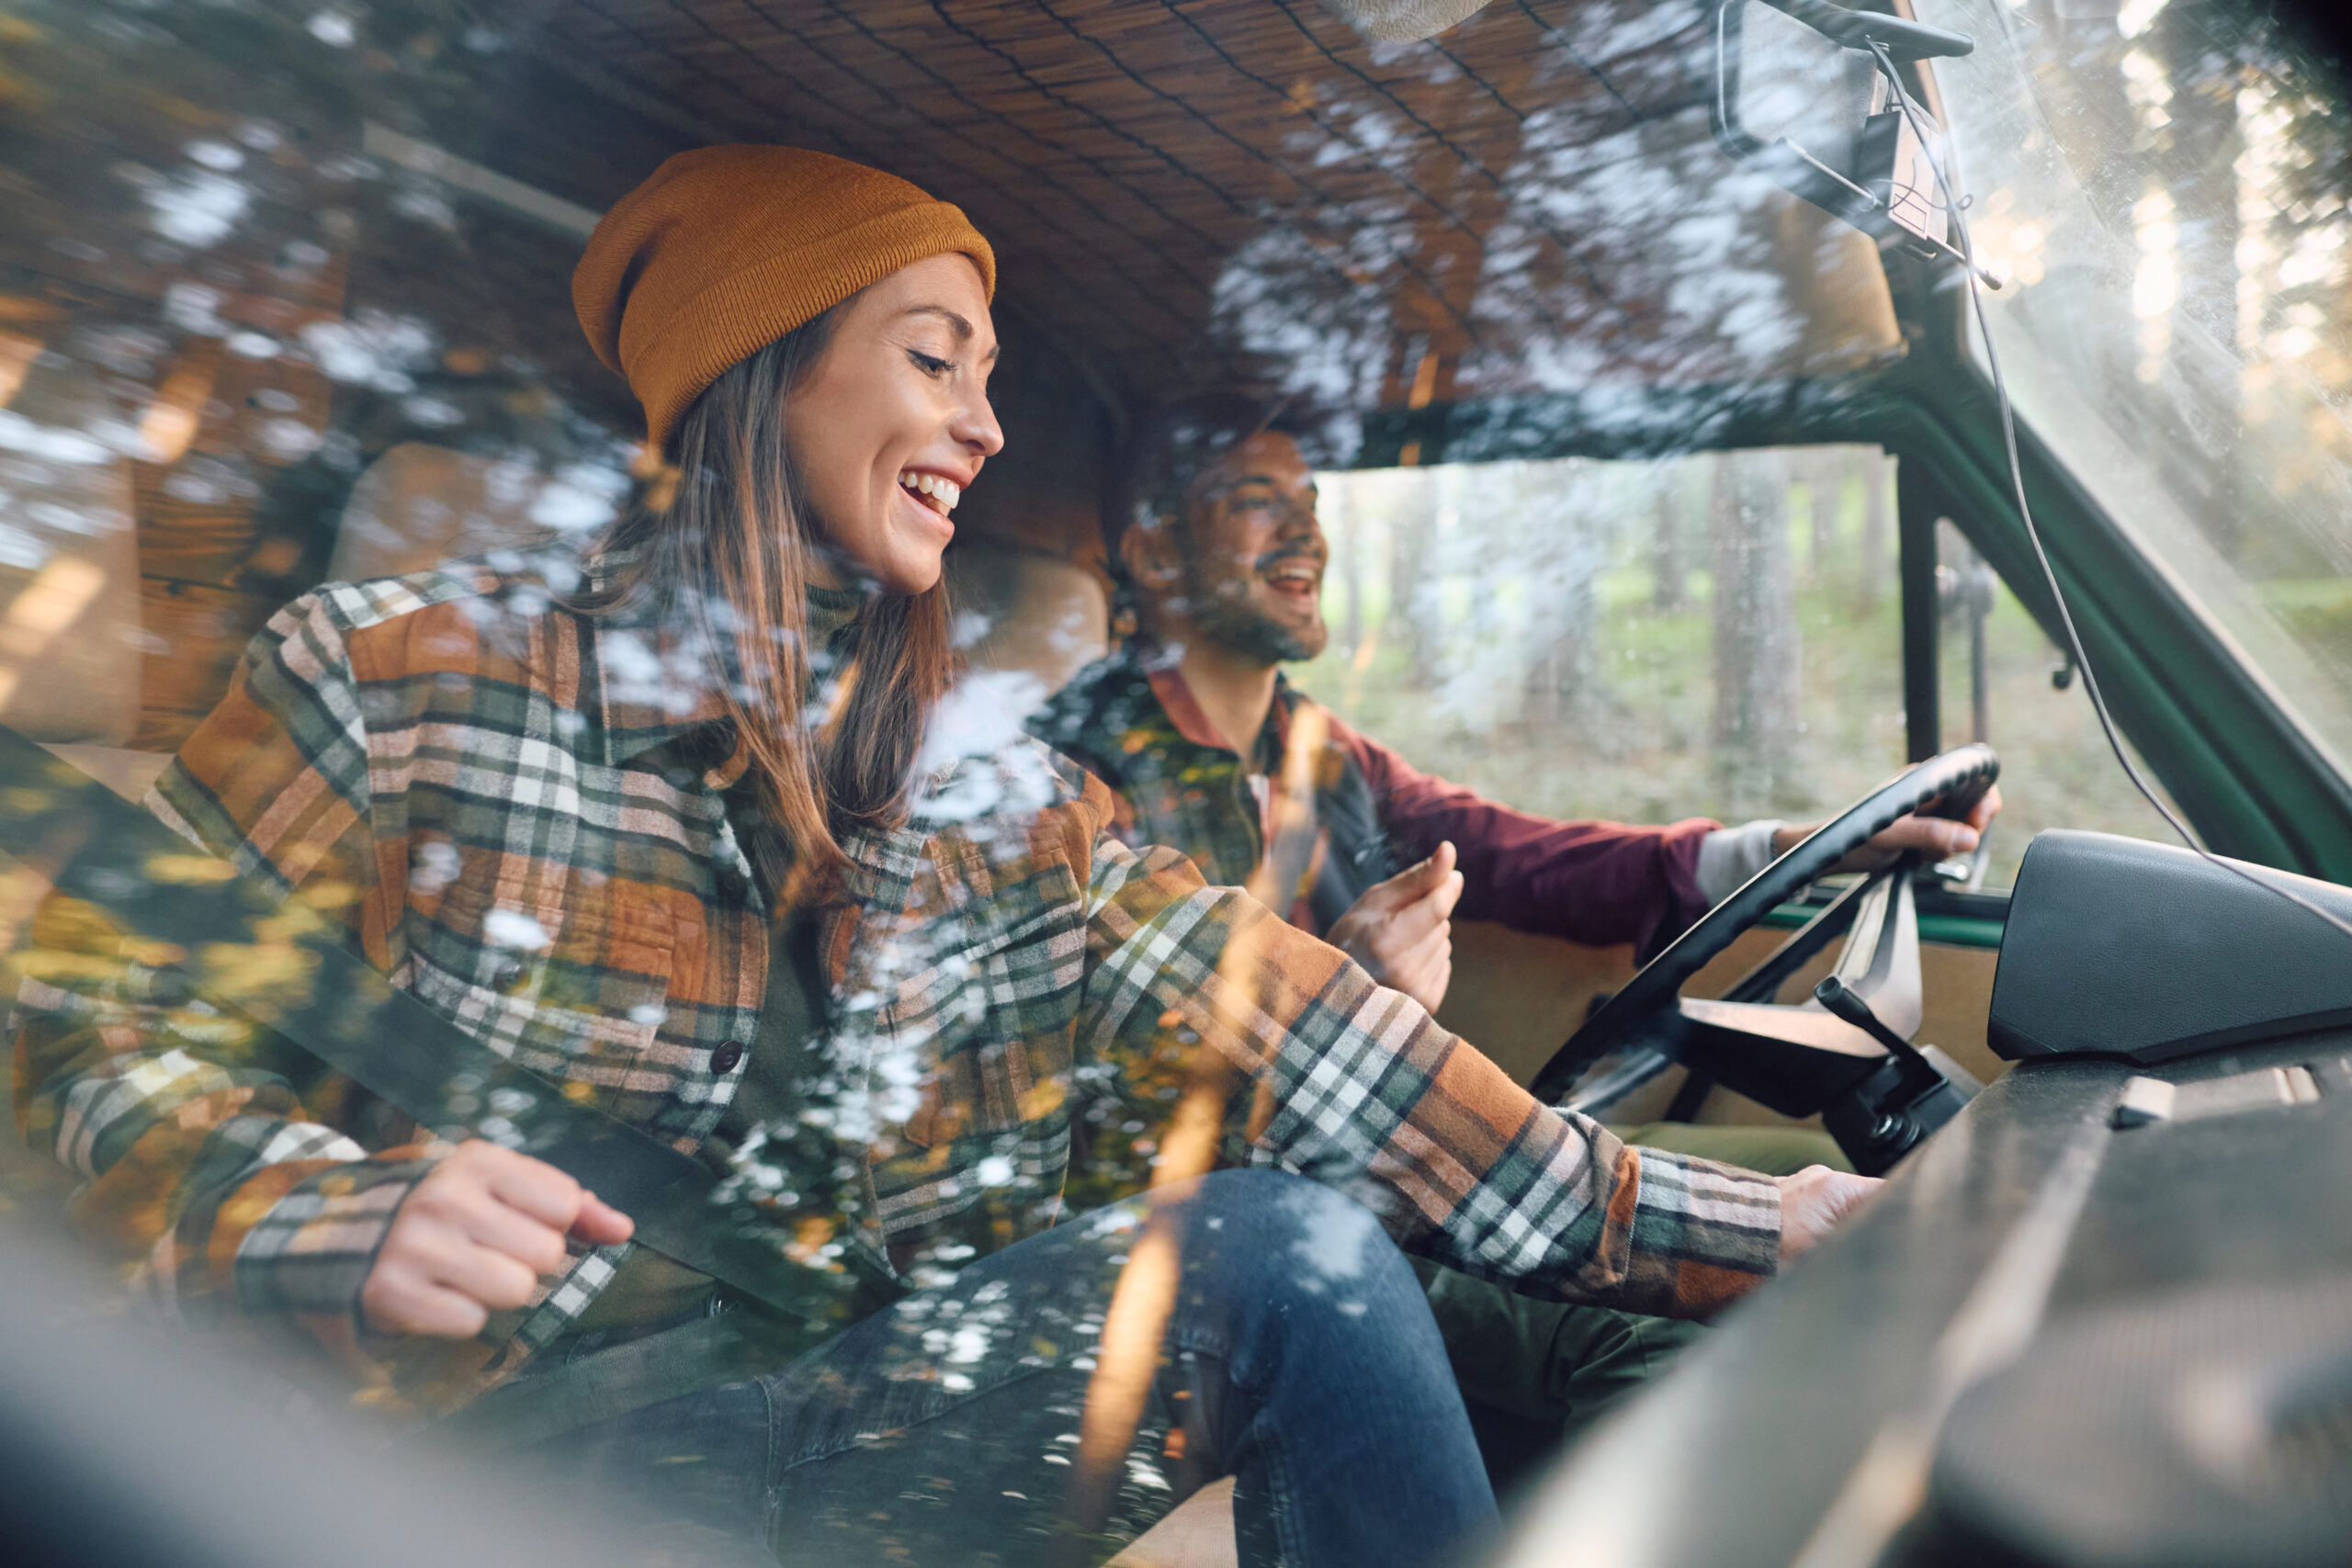 Five Safety Tips for Your Recreational Vehicle (RV) Trip